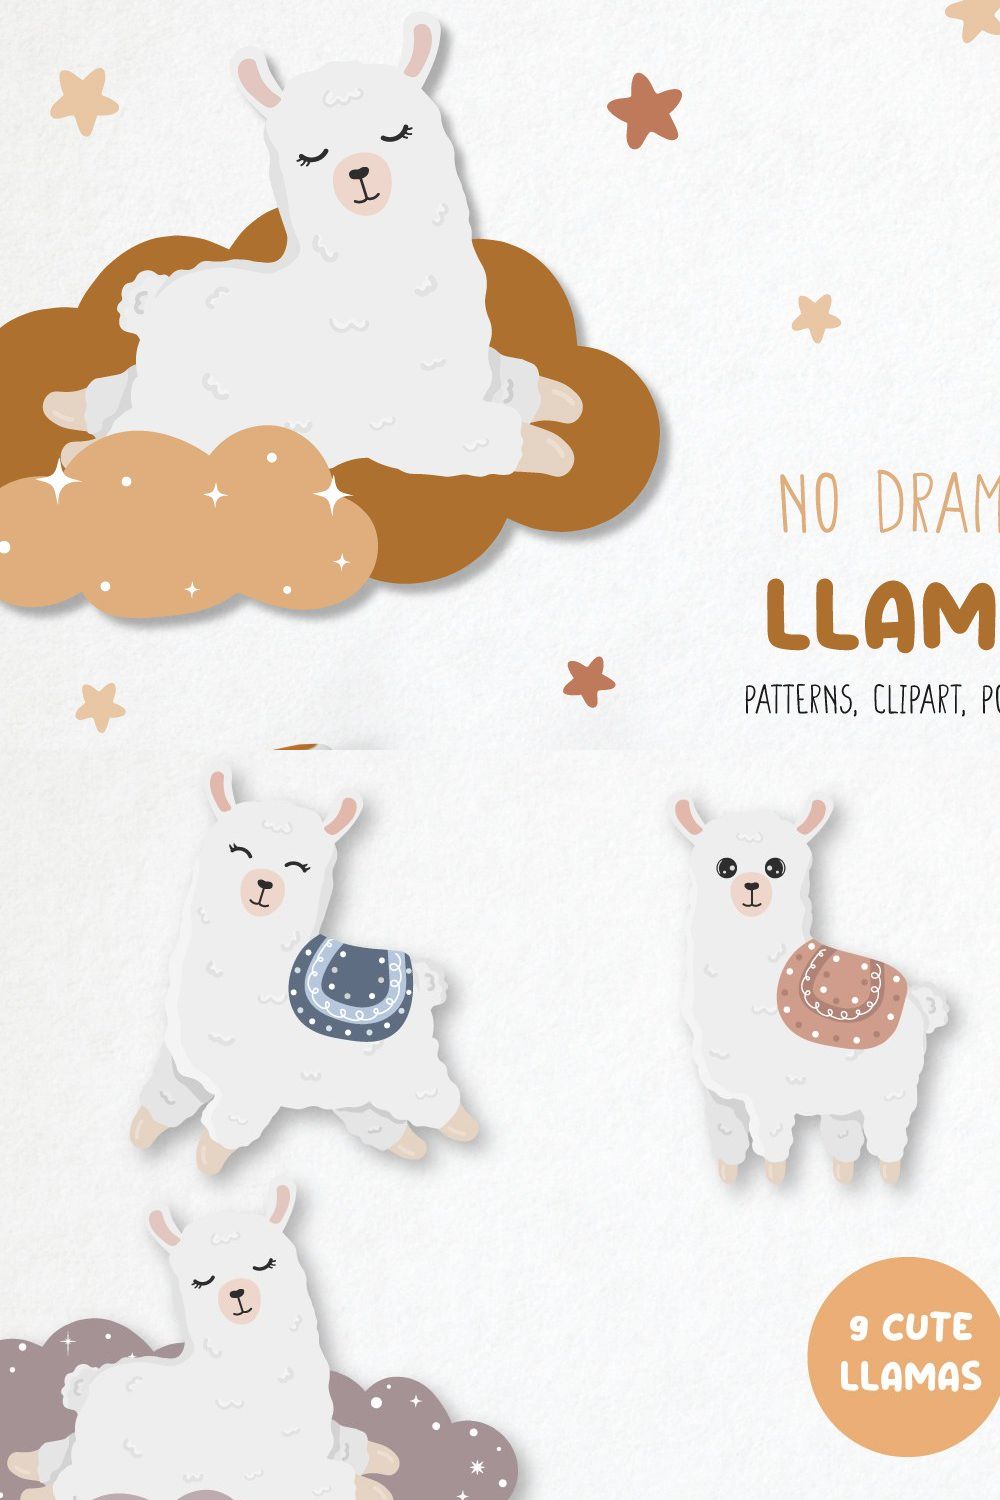 Cute llama collection pinterest preview image.